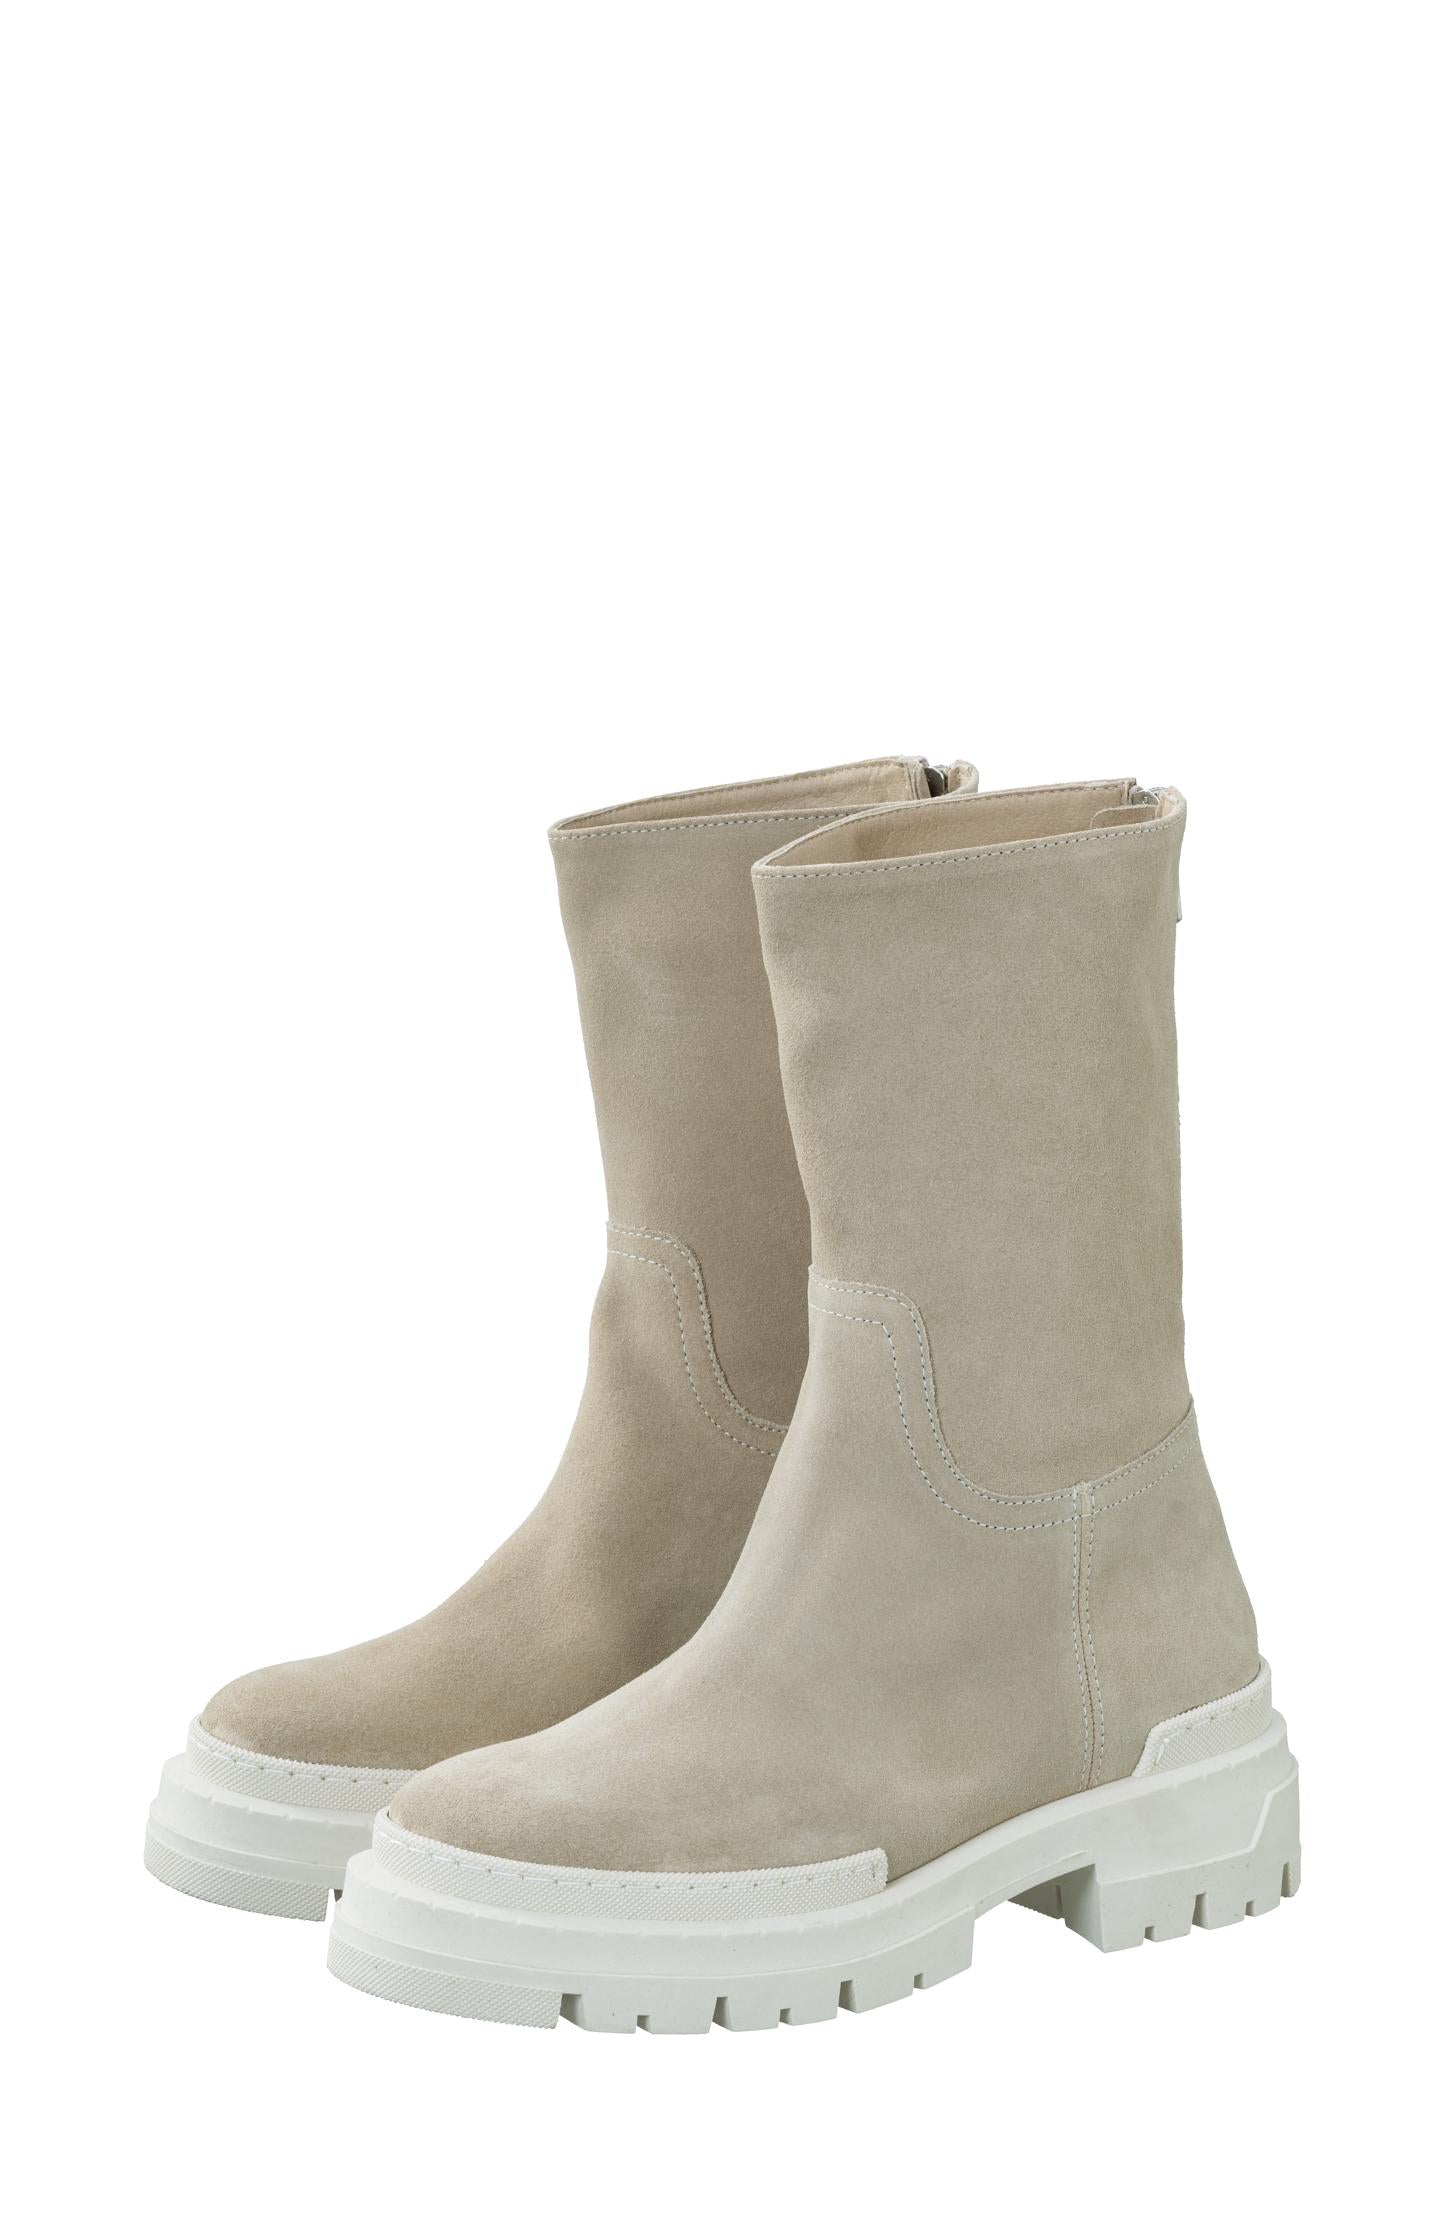 Sturdy suede boots with zipper and rubber soles - Birch Sand - Type: product